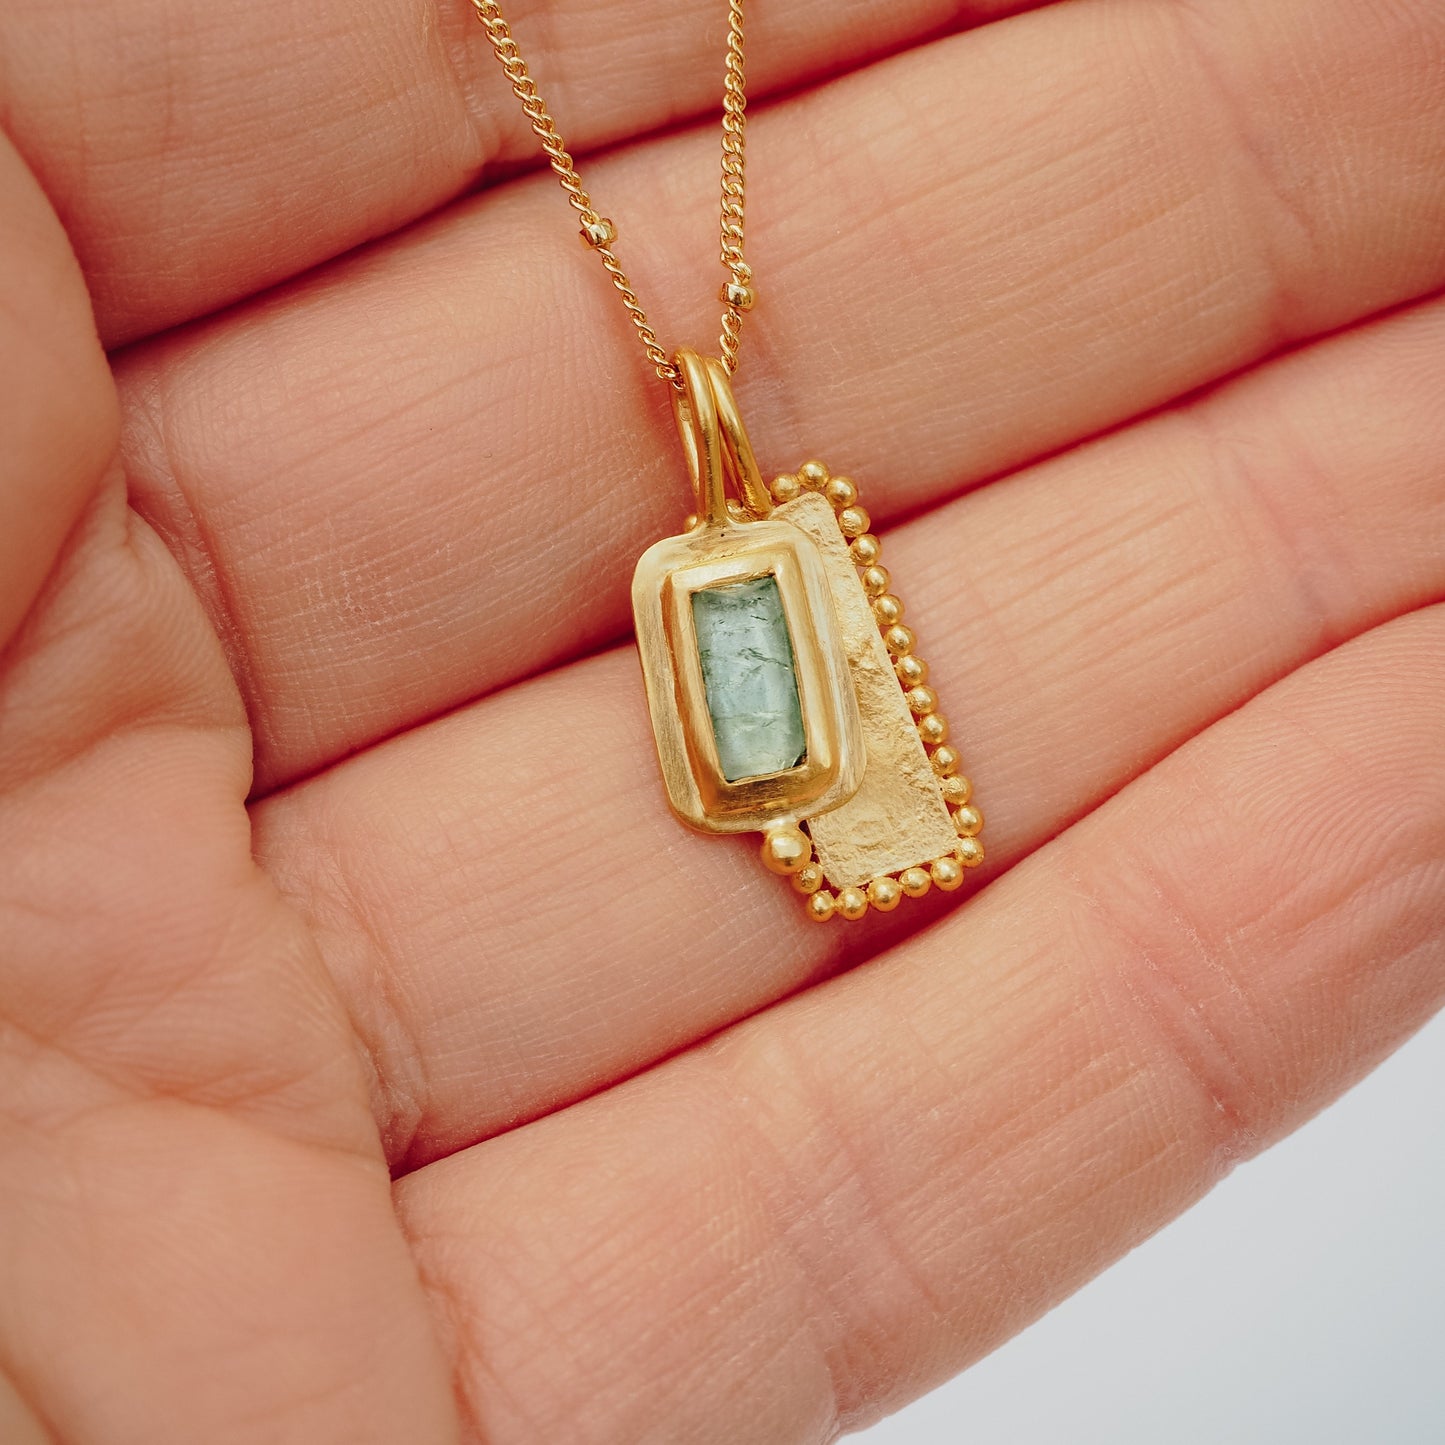 Exquisite square gold pendant adorned with a vibrant blue rose cut tourmaline gemstone and intricate granulation, hanging delicately from a satellite chain.